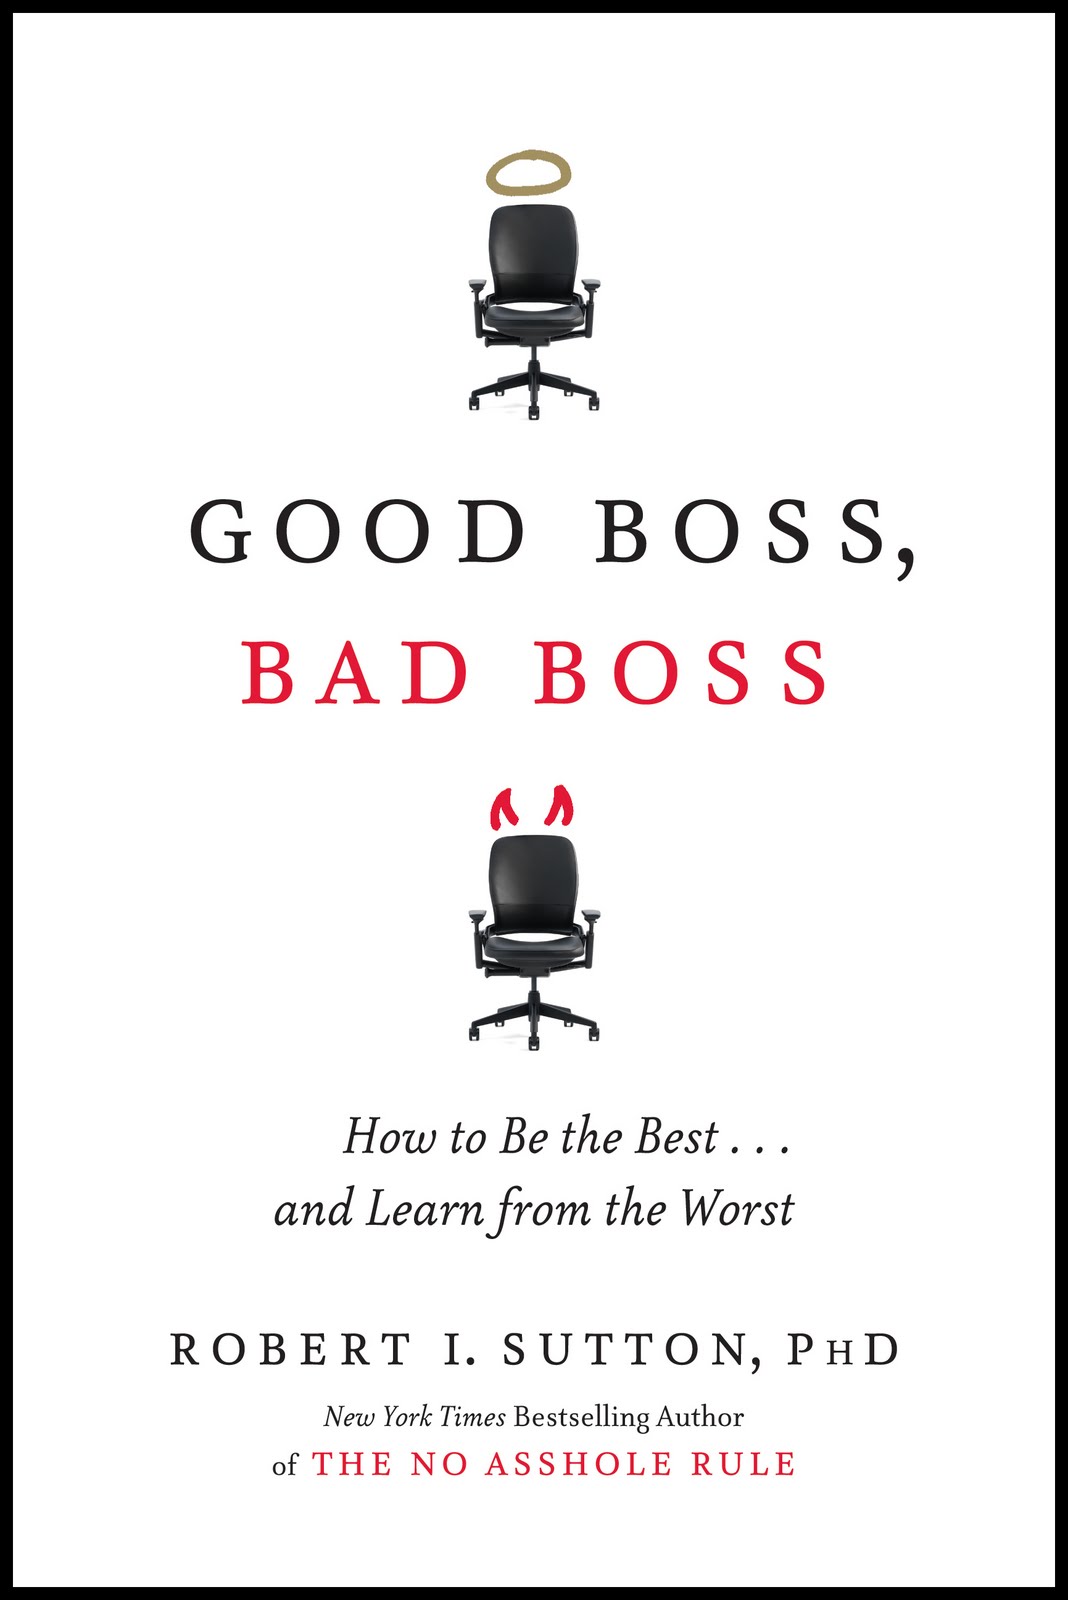 Good Boss Bad Boss How to Be the Best and Learn from the Worst
Epub-Ebook